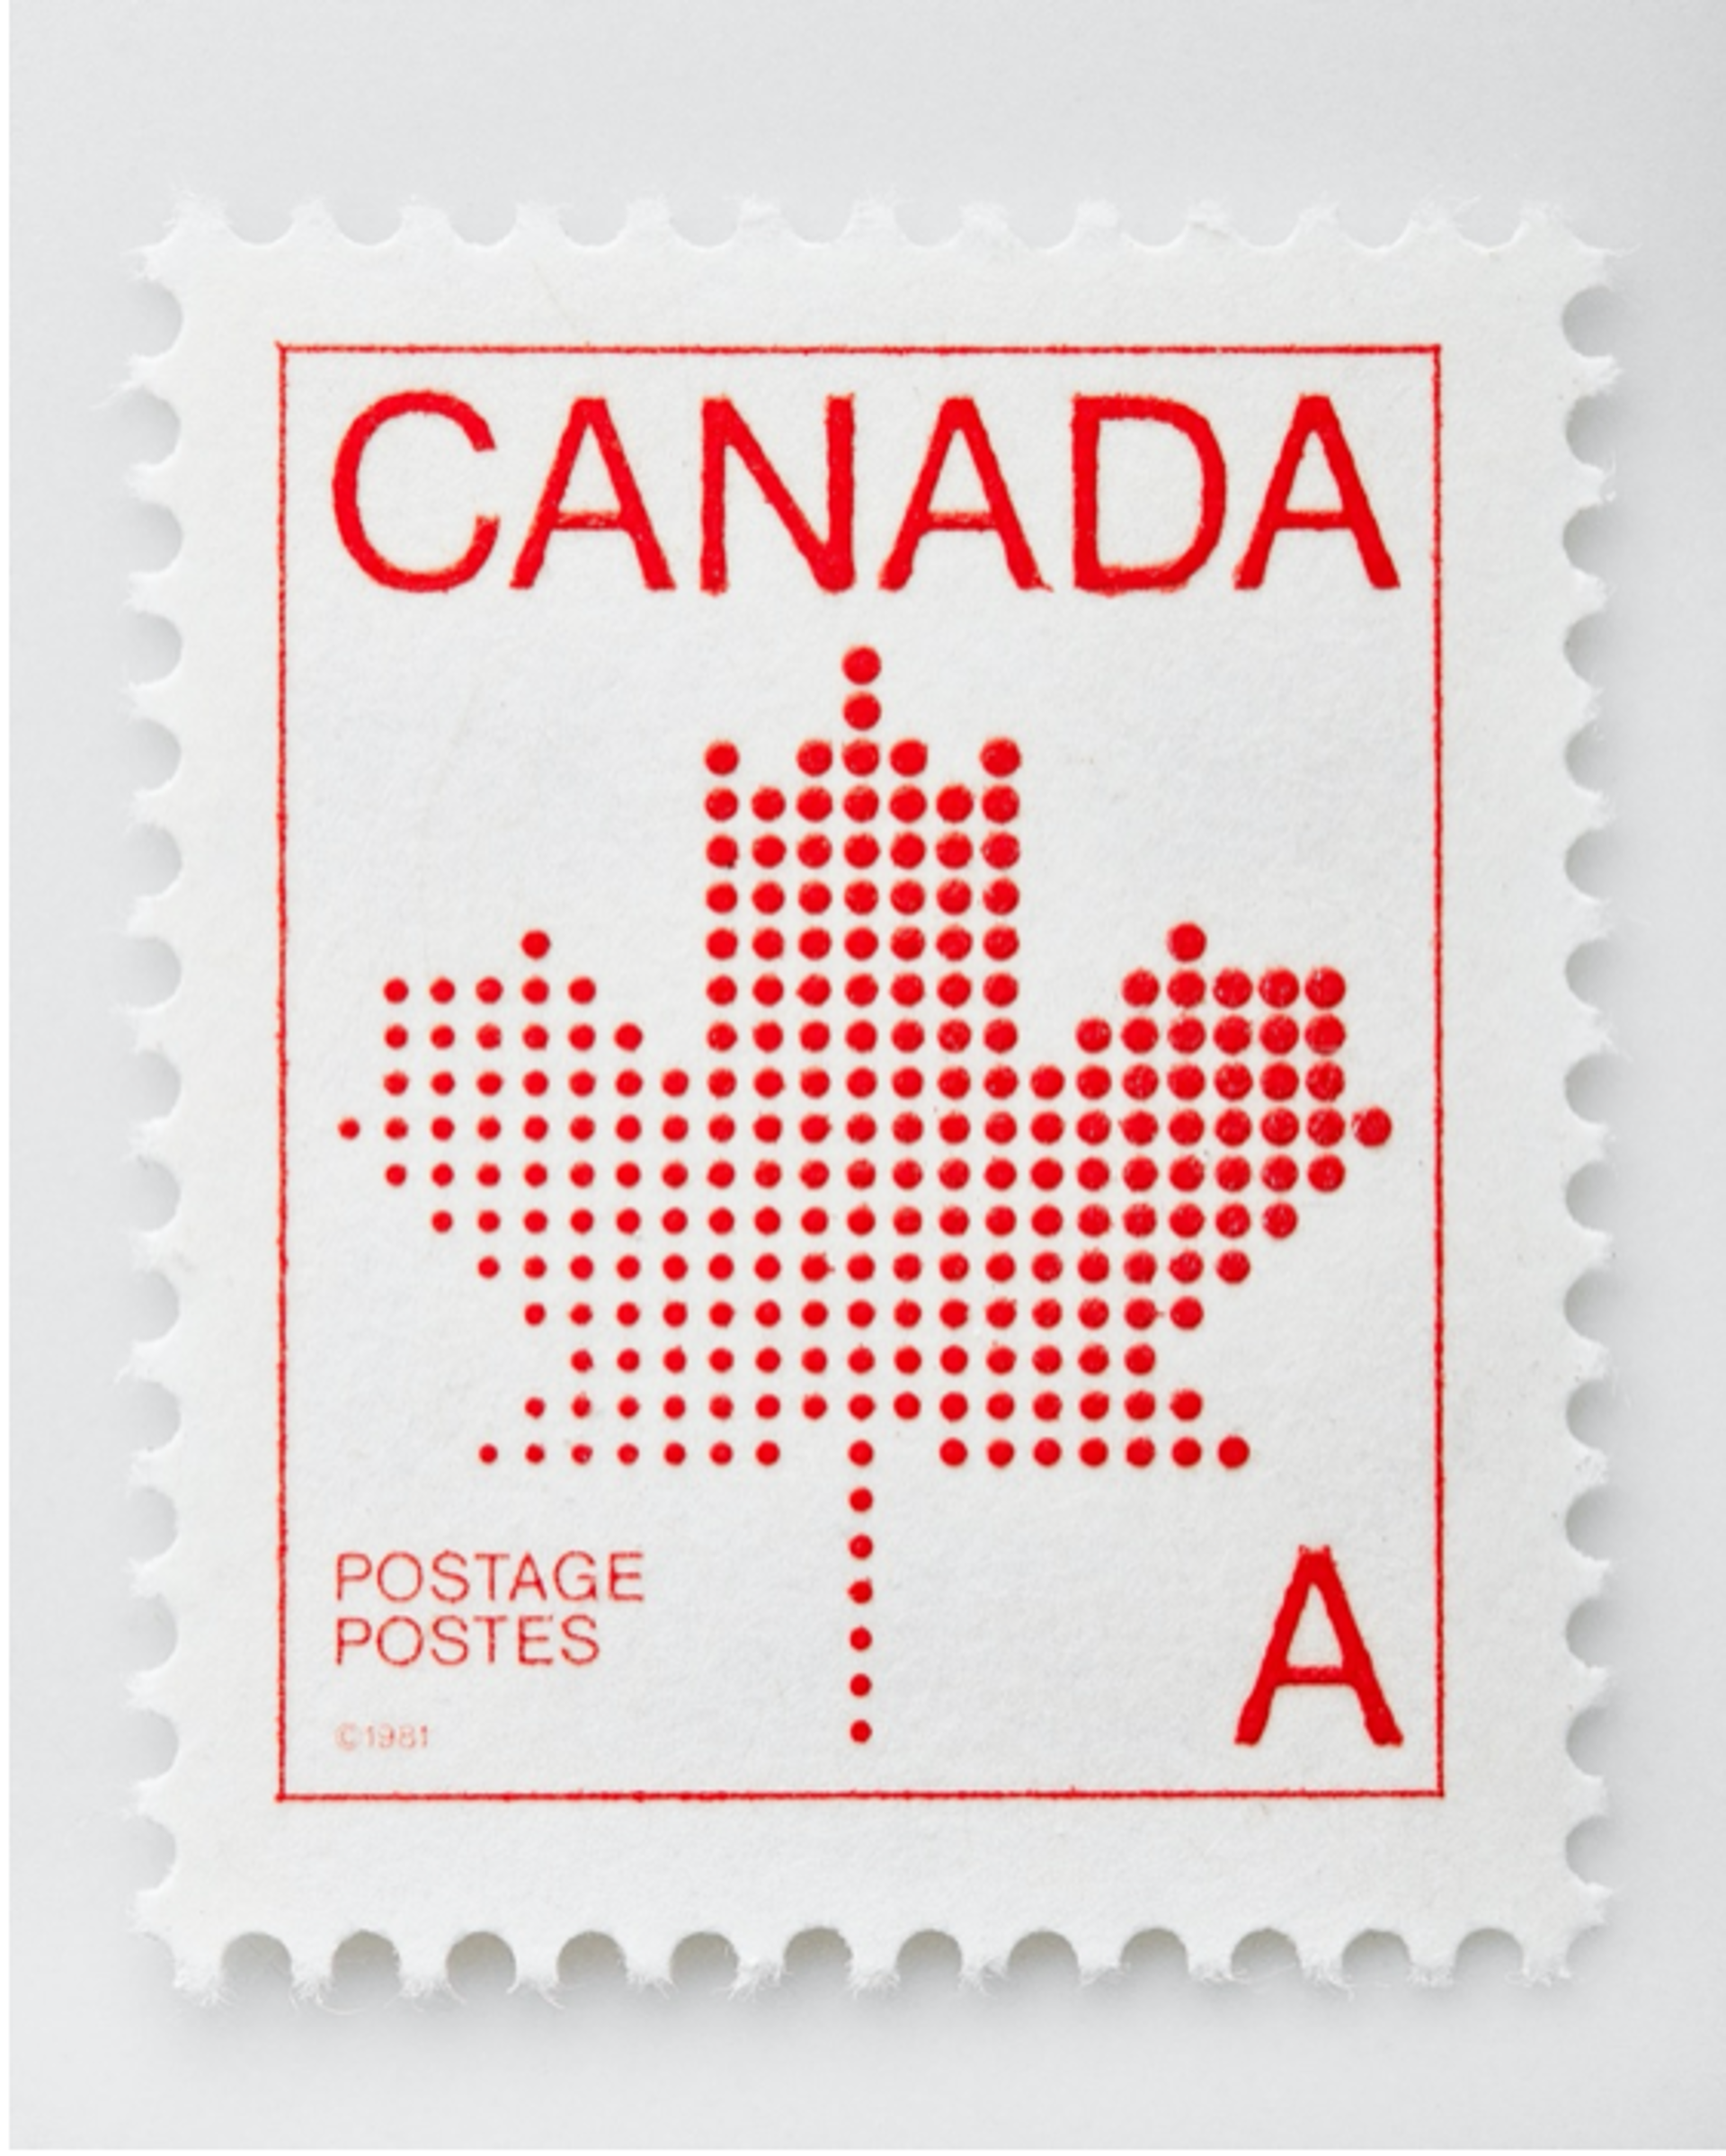 Canada "A" Stamp by Peter Andrew Lusztyk | Collectibles